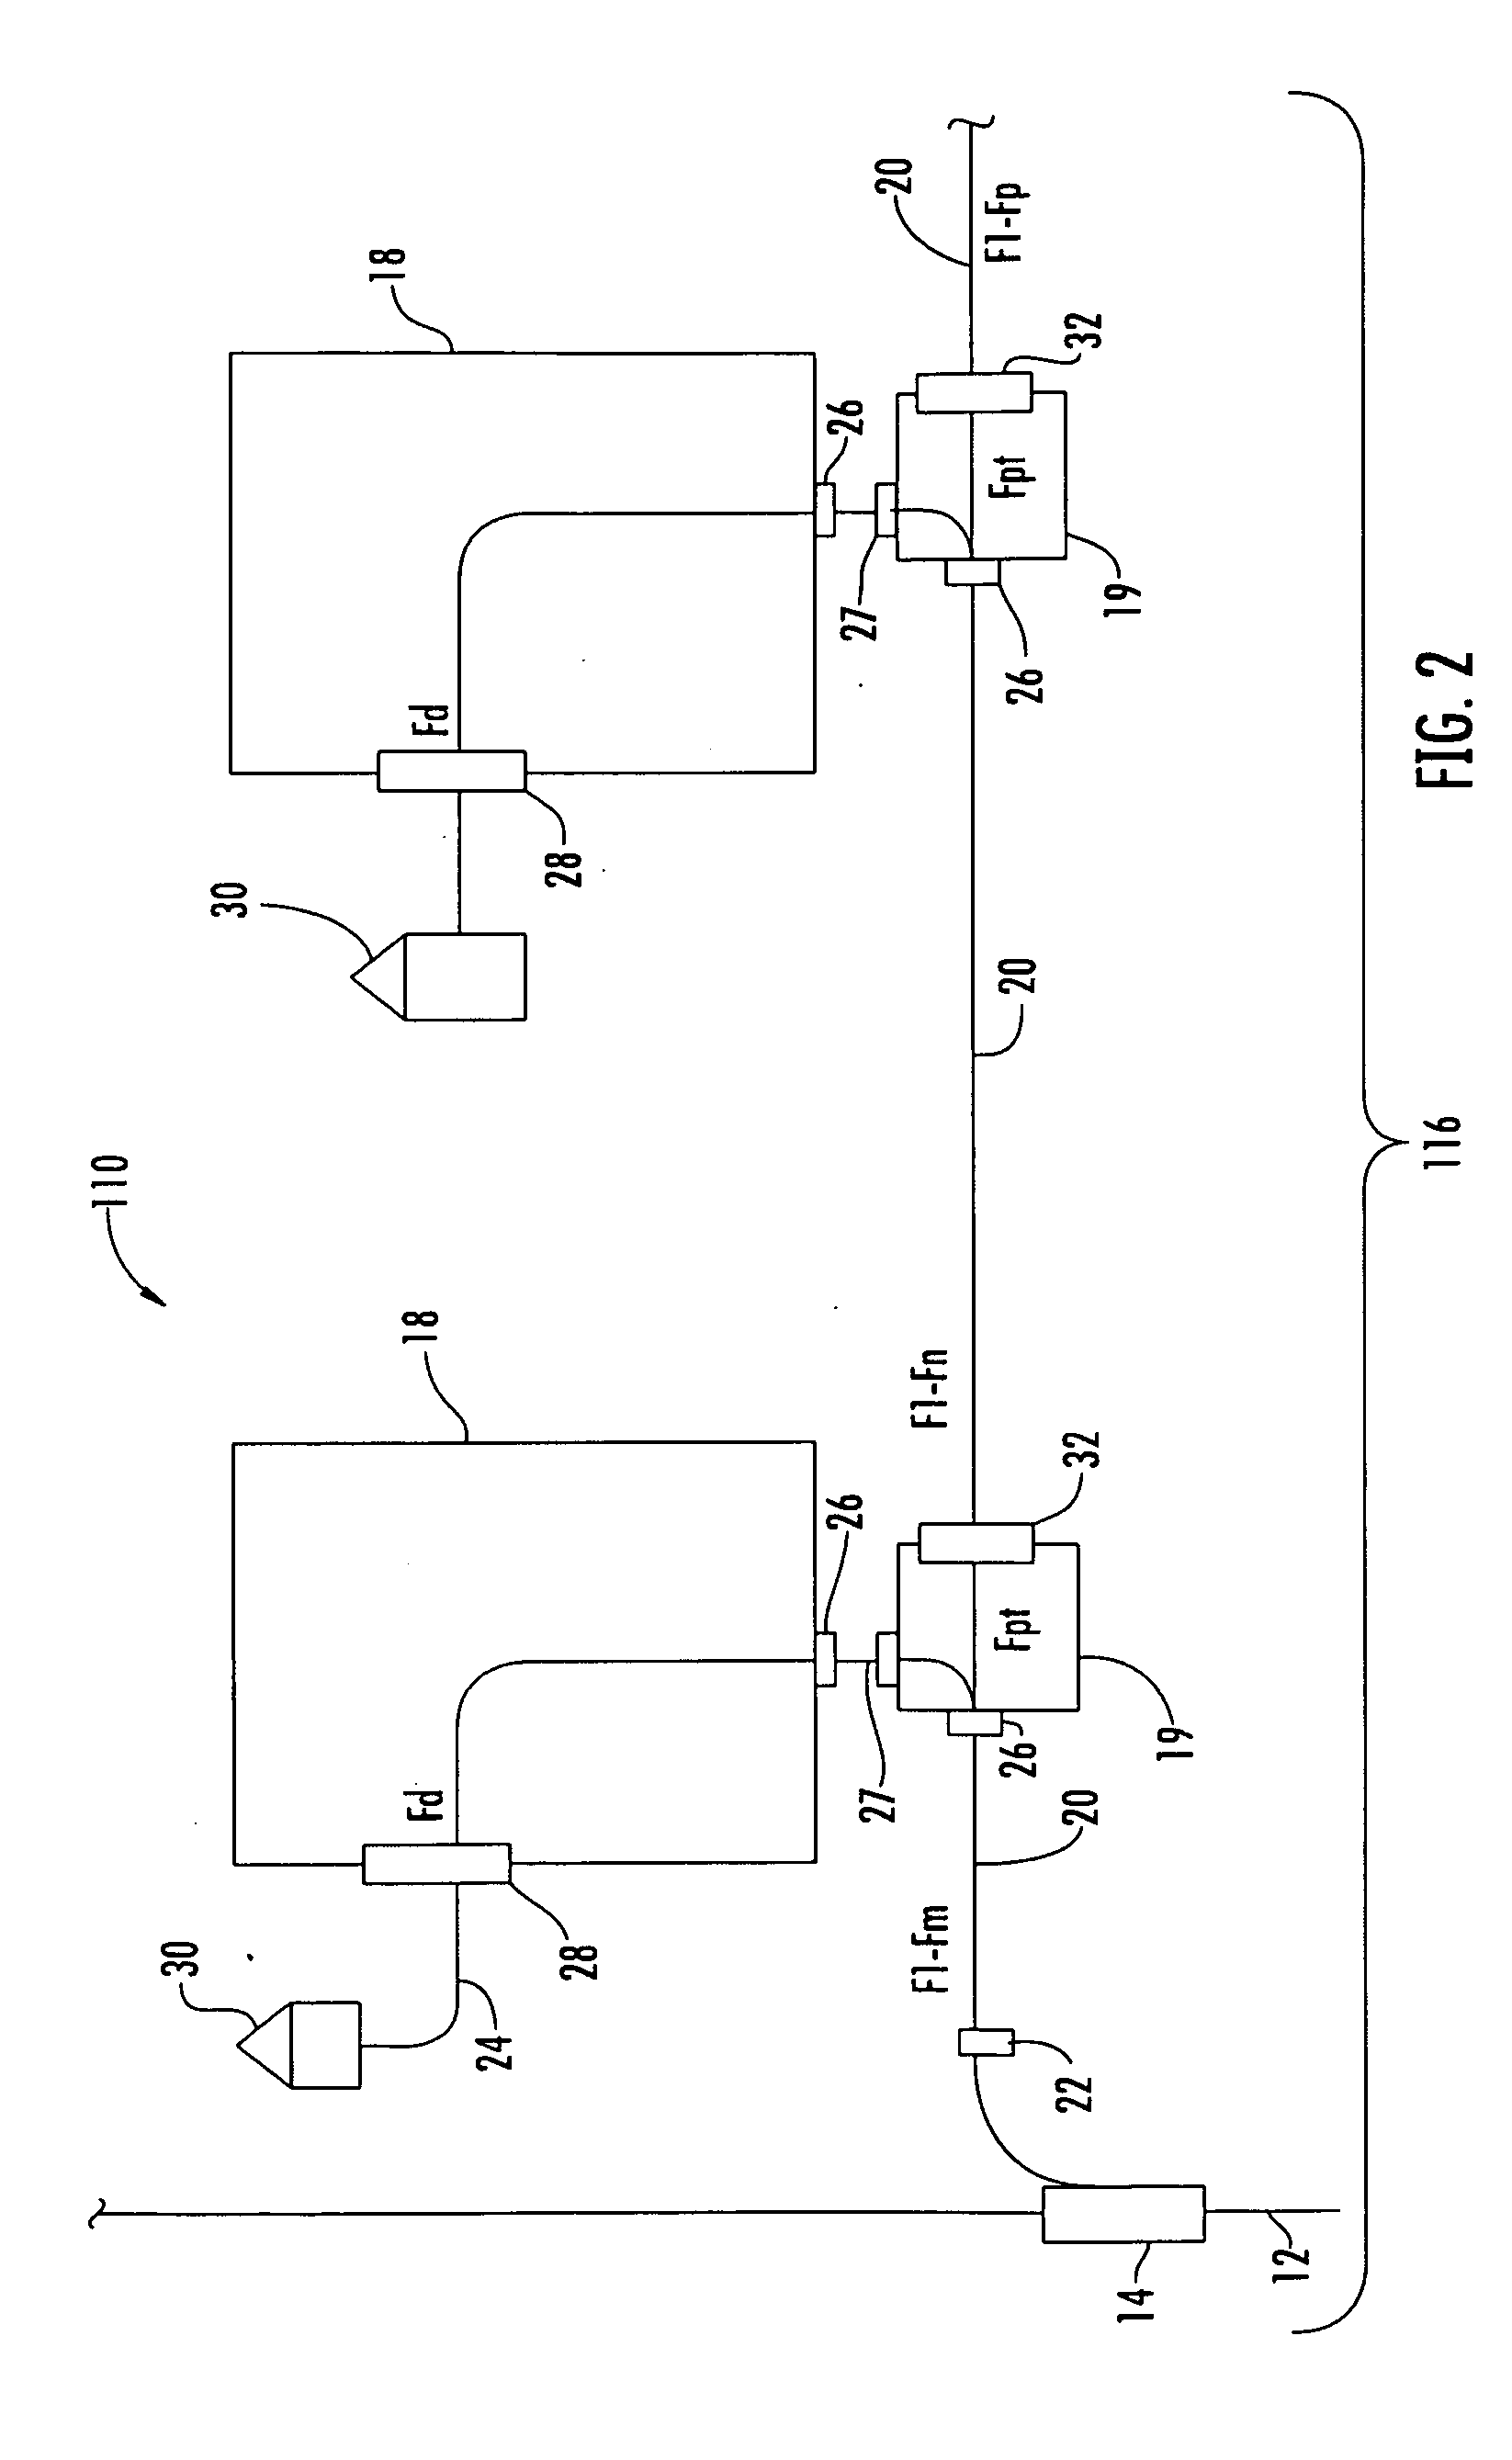 Optical Connection Terminal Having Port Mapping Scheme